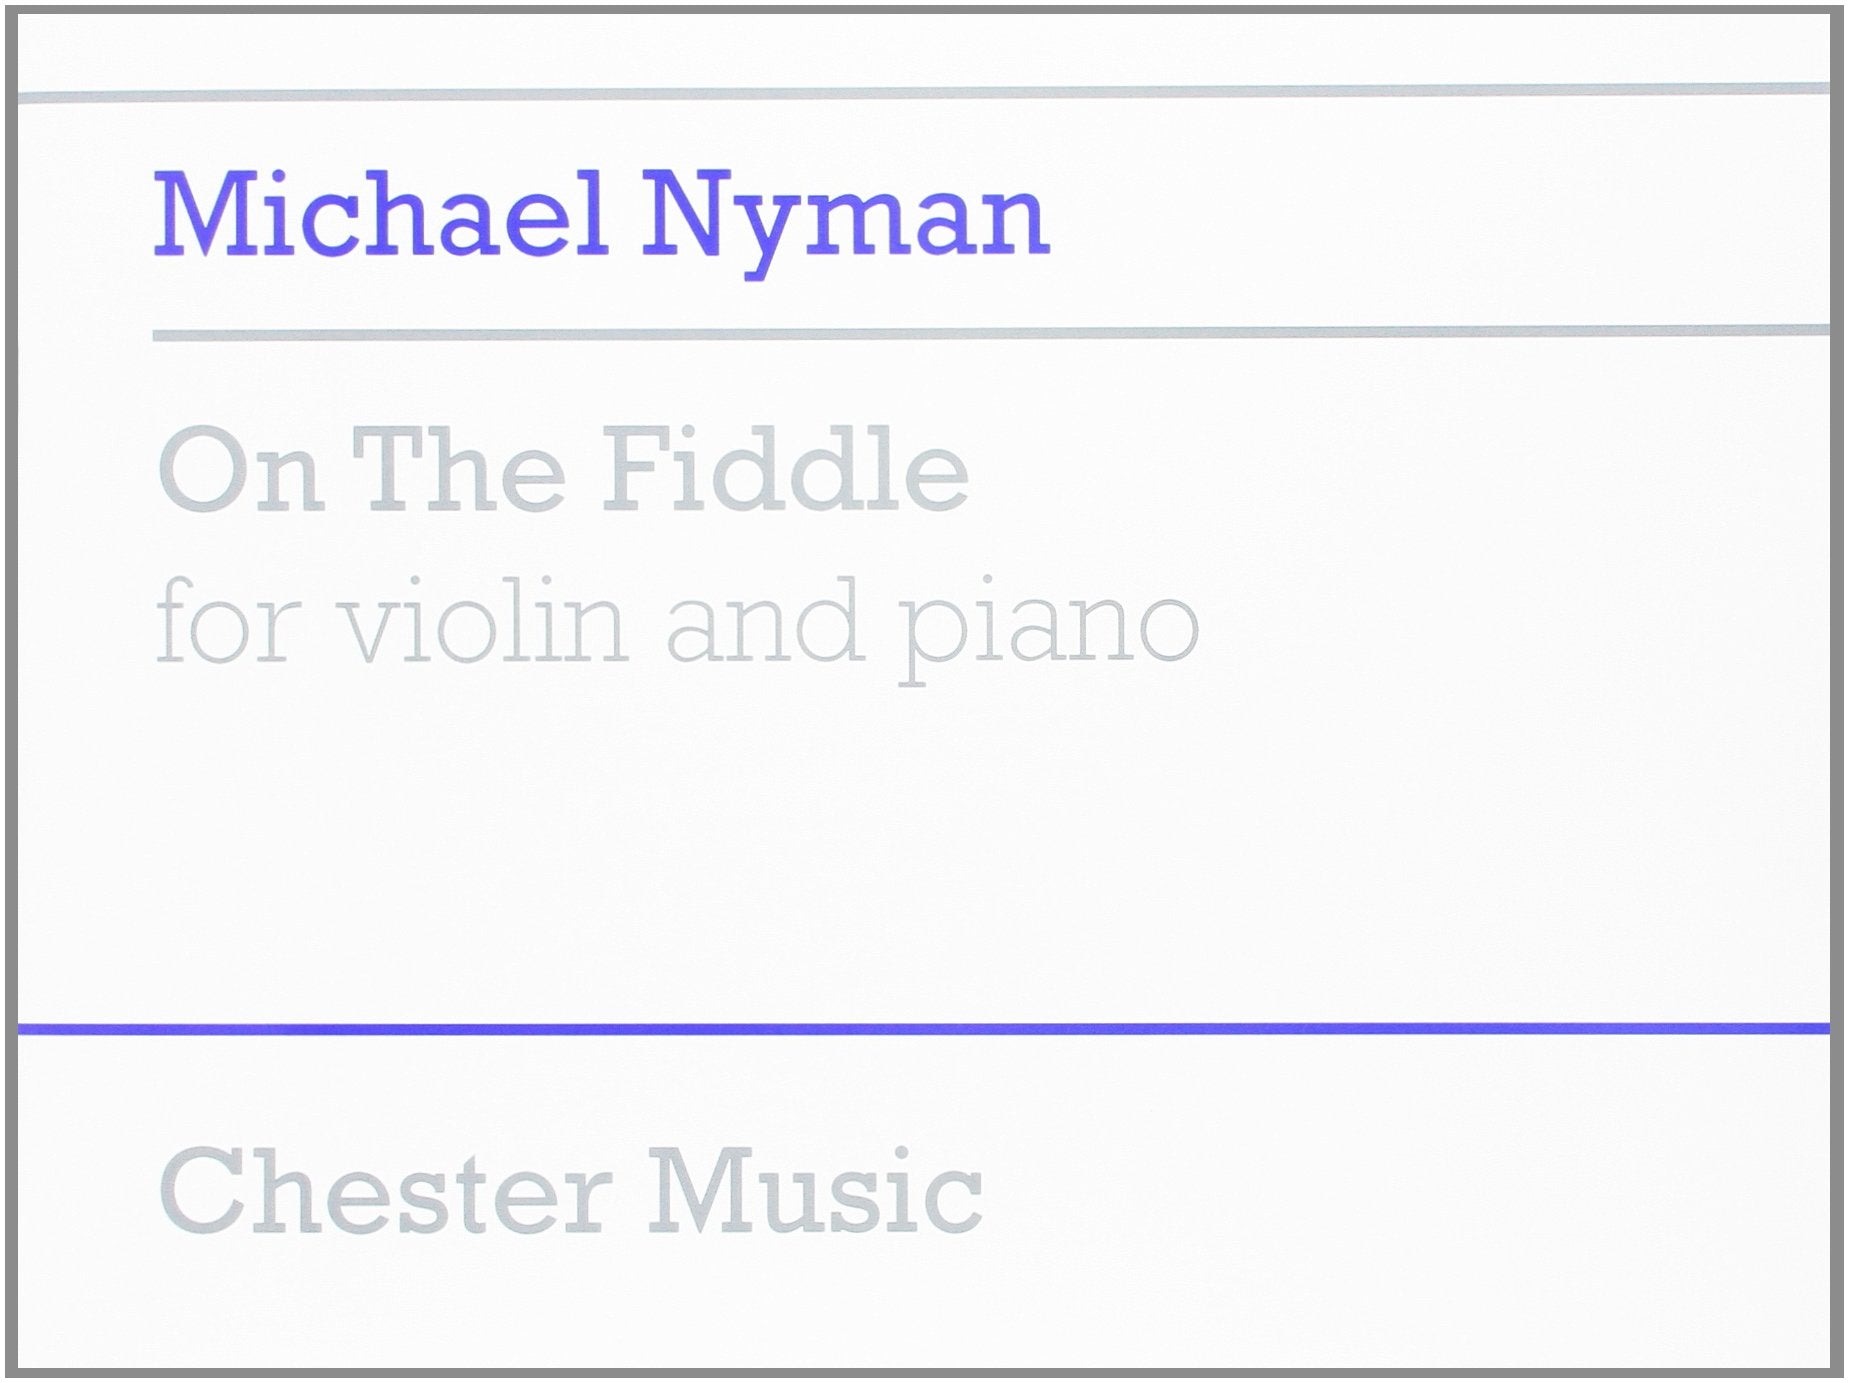 Nyman: On The Fiddle